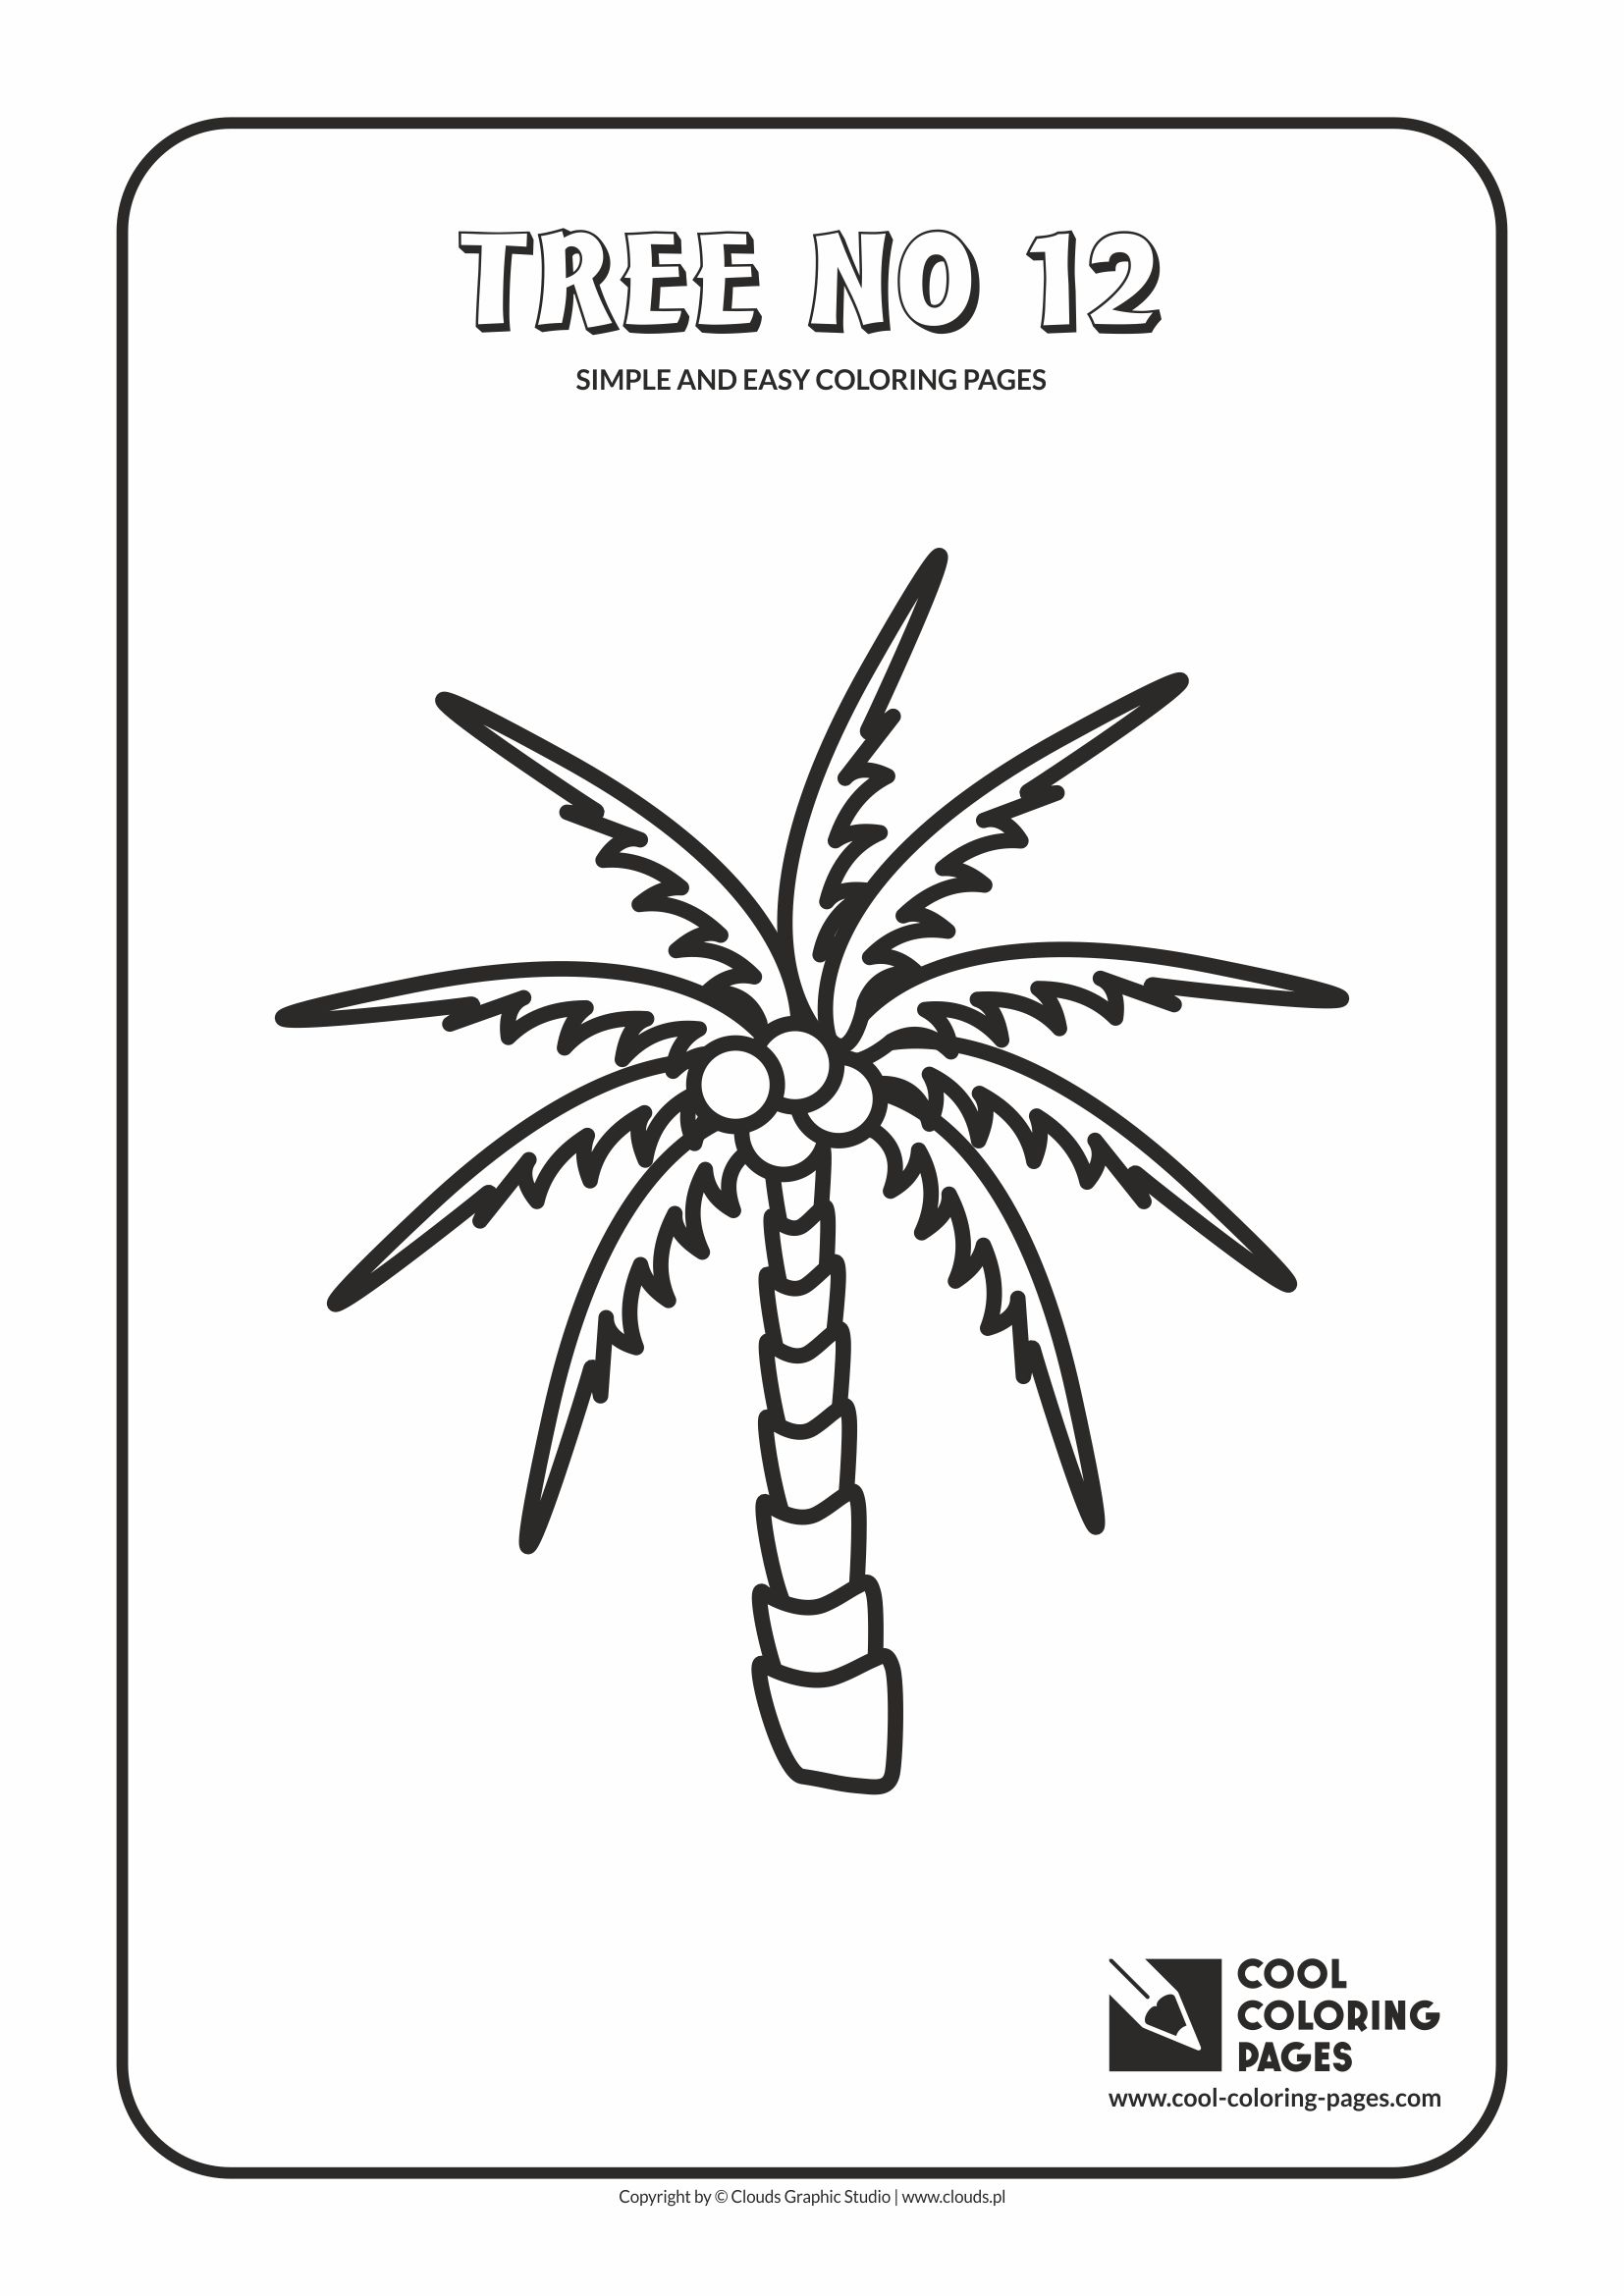 Simple and easy coloring pages for toddlers - Tree no 12